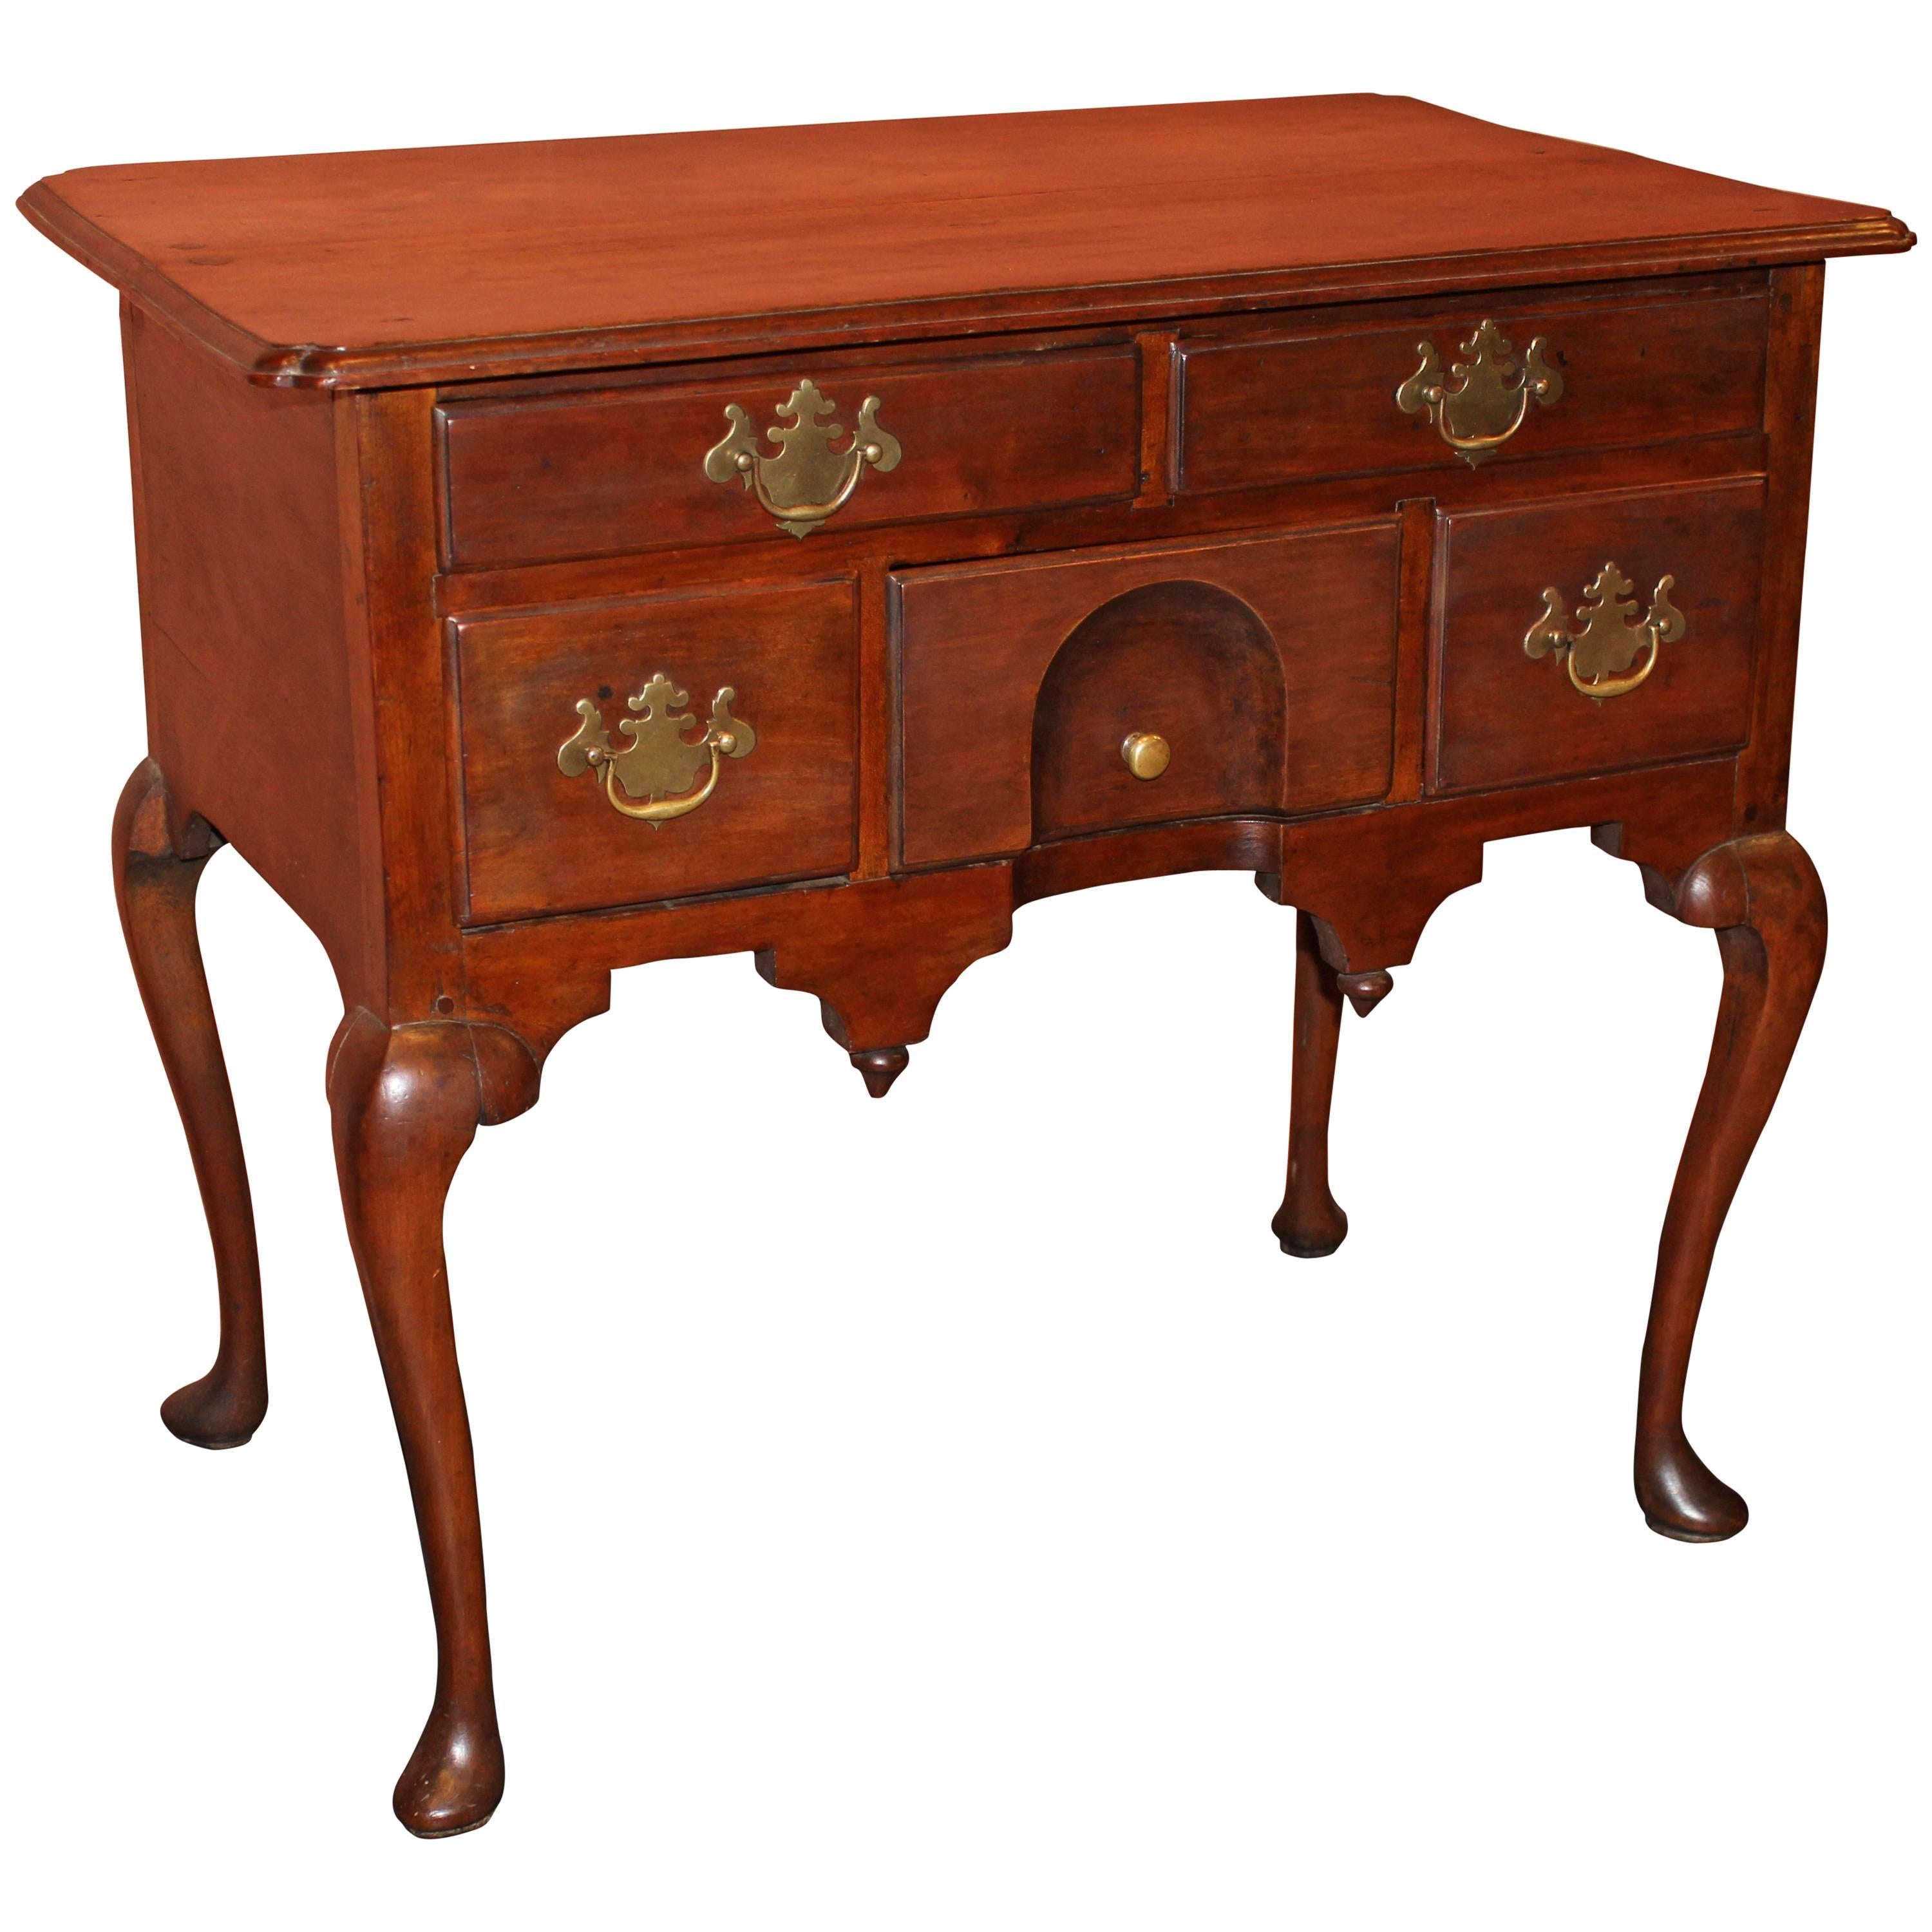 18th Century Massachusetts Queen Anne Lowboy or Dressing Table